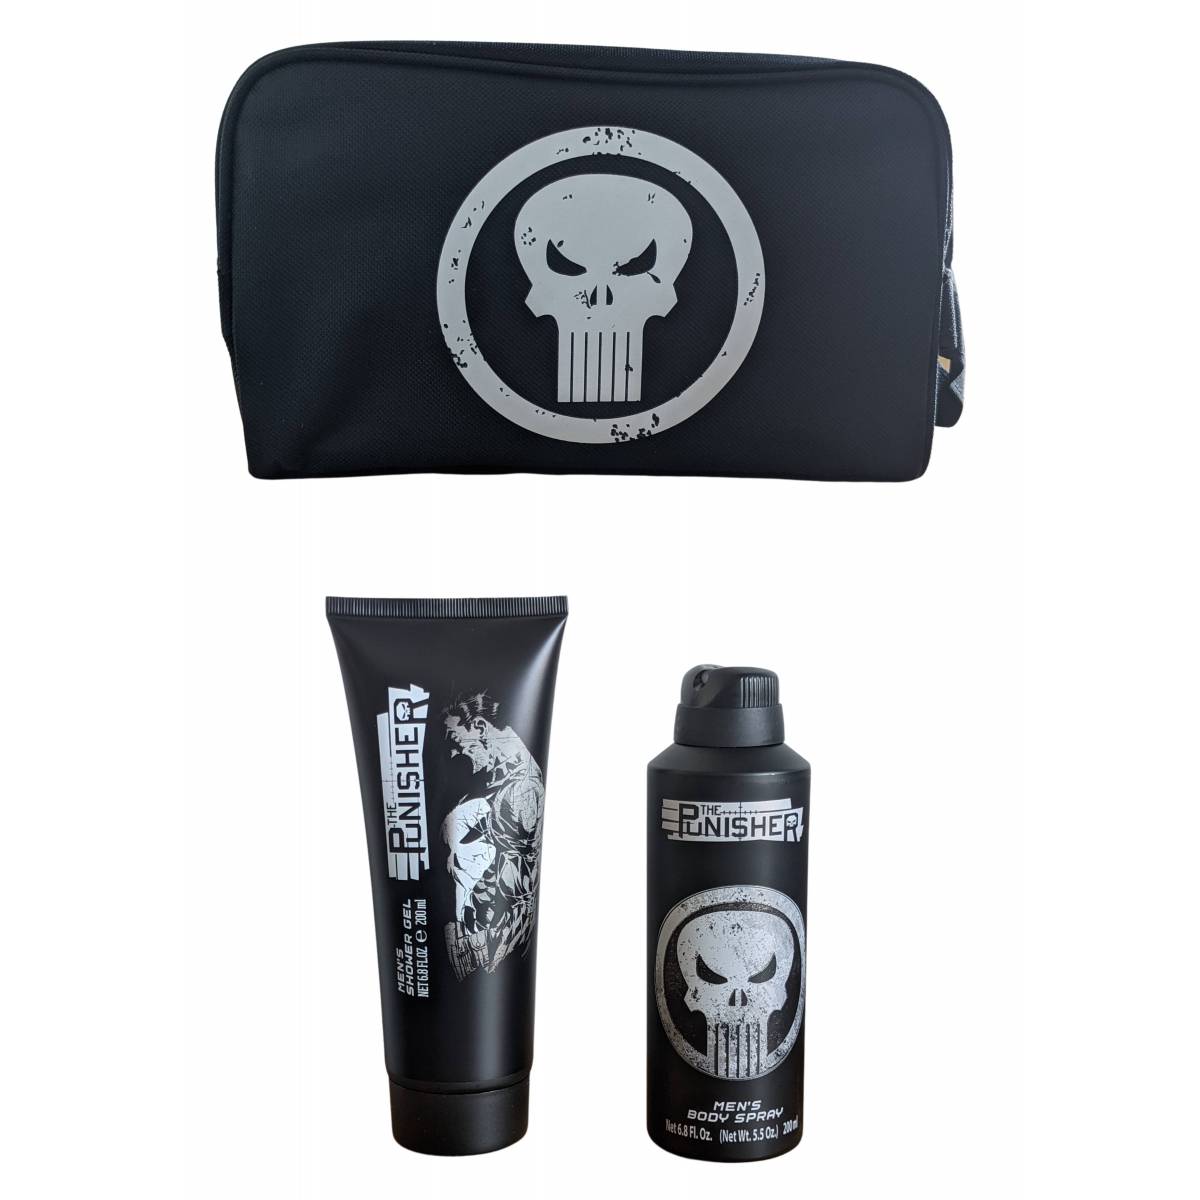 Marvel The Punisher toiletry bag